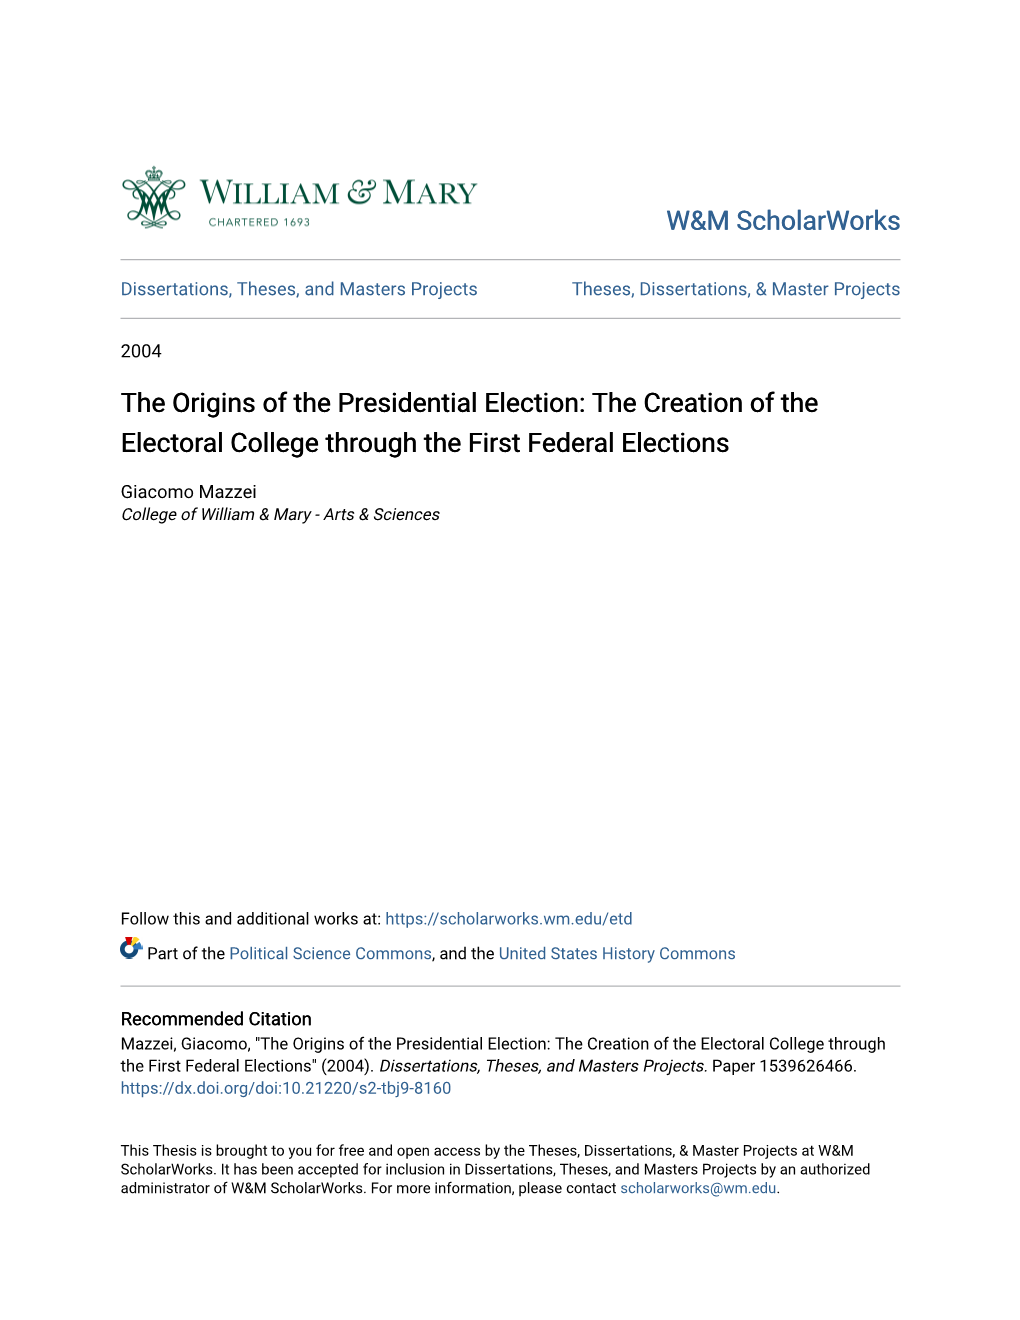 The Origins of the Presidential Election: the Creation of the Electoral College Through the First Federal Elections